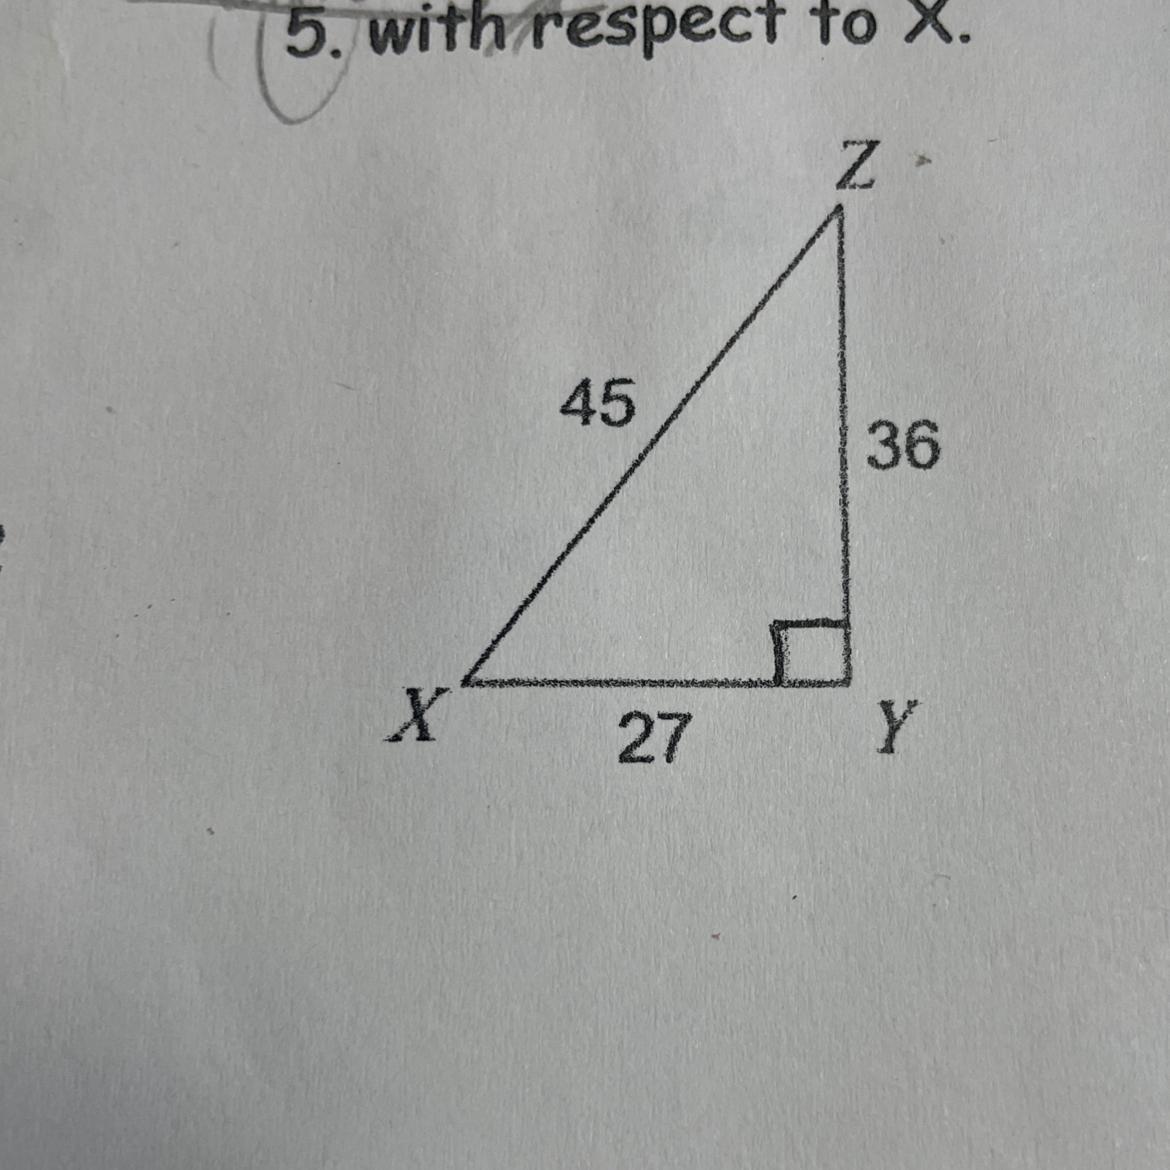 Find The Three Trigonometric Ratios. If Needed, Reduce Fractions.